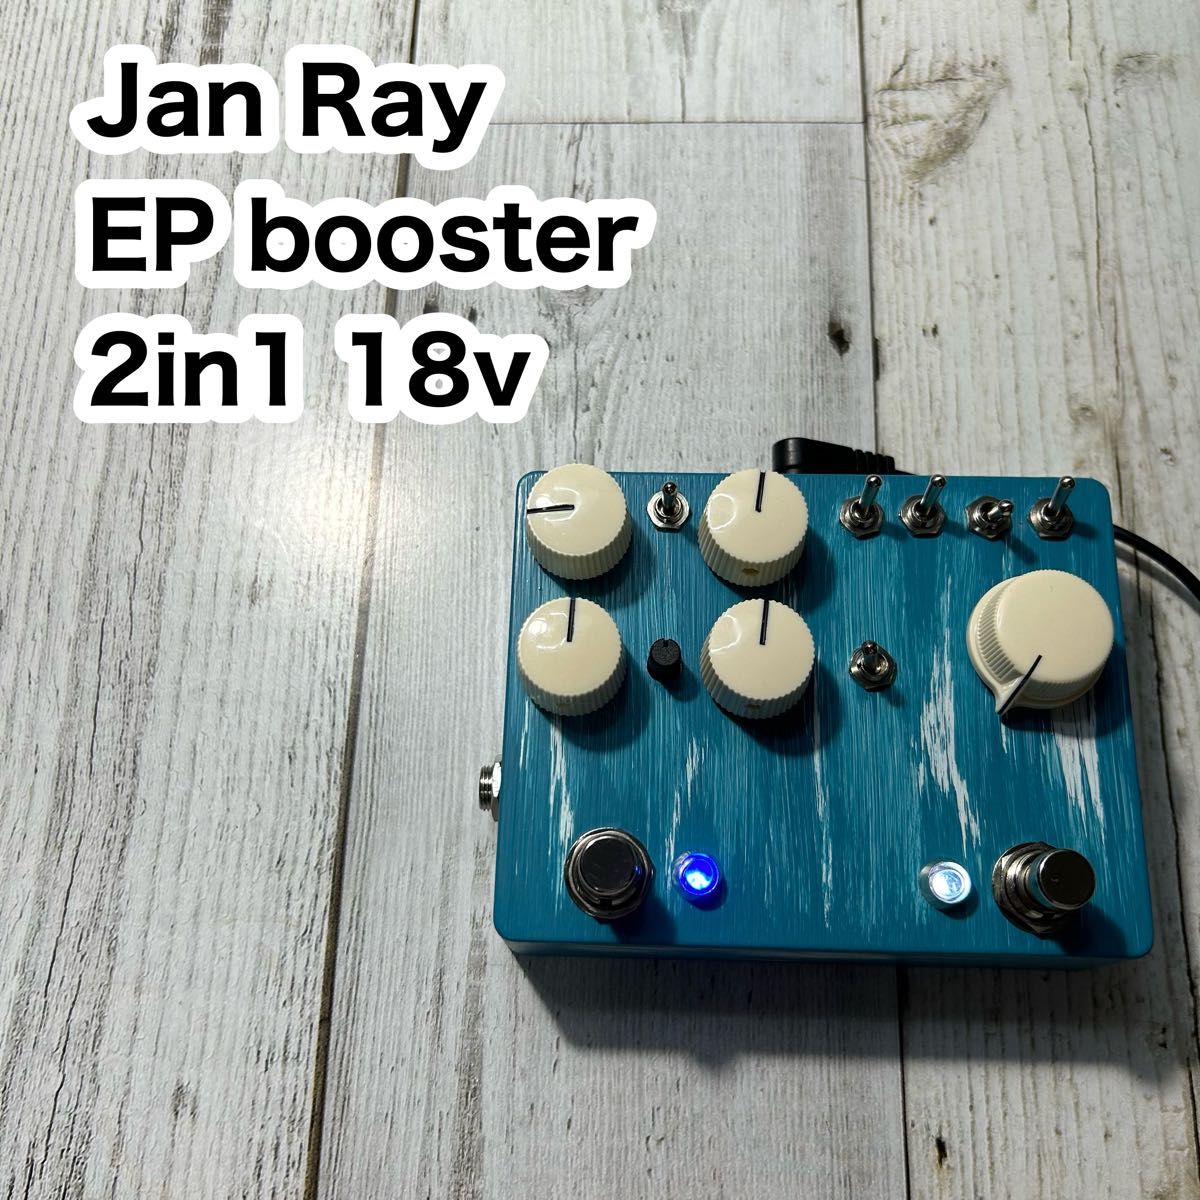 Jan Ray + EP booster 2in1 18v｜Yahoo!フリマ（旧PayPayフリマ）